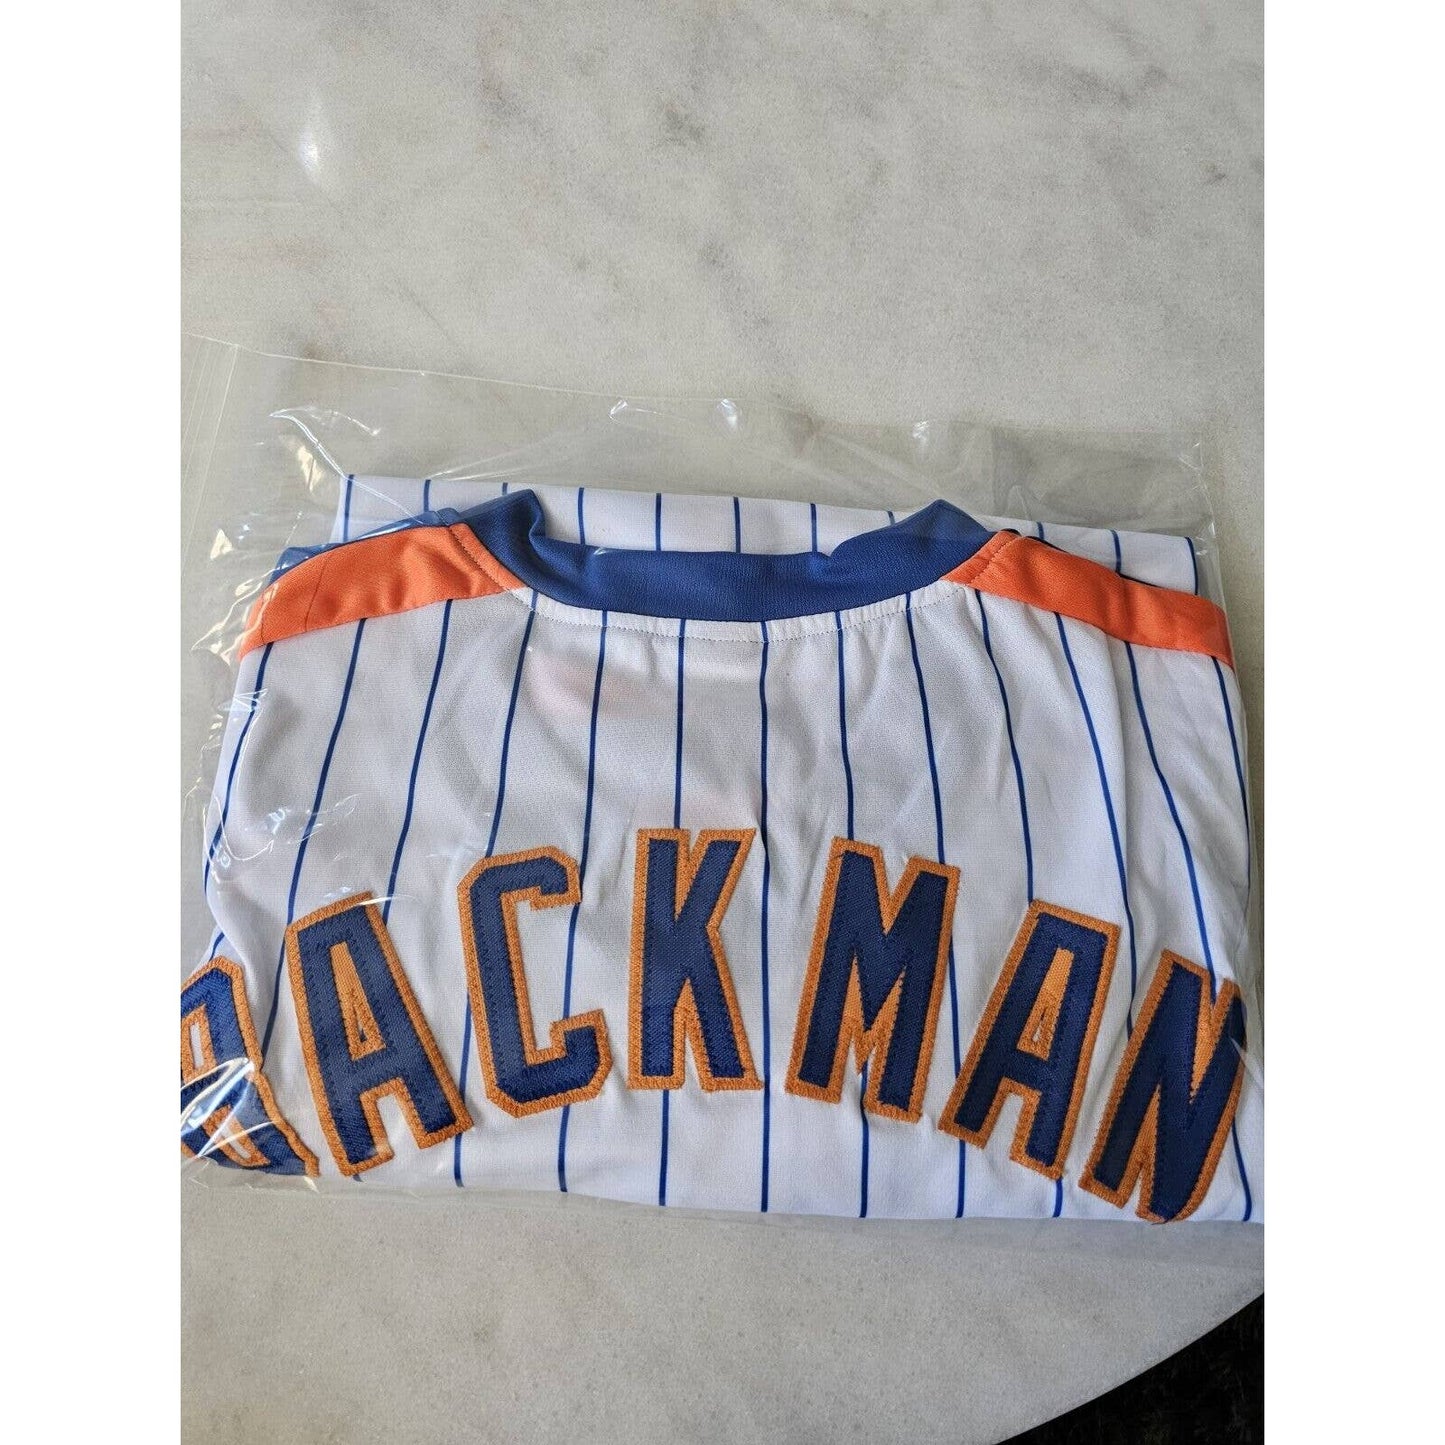 Wally Backman Autographed/Signed Jersey New York Mets NY